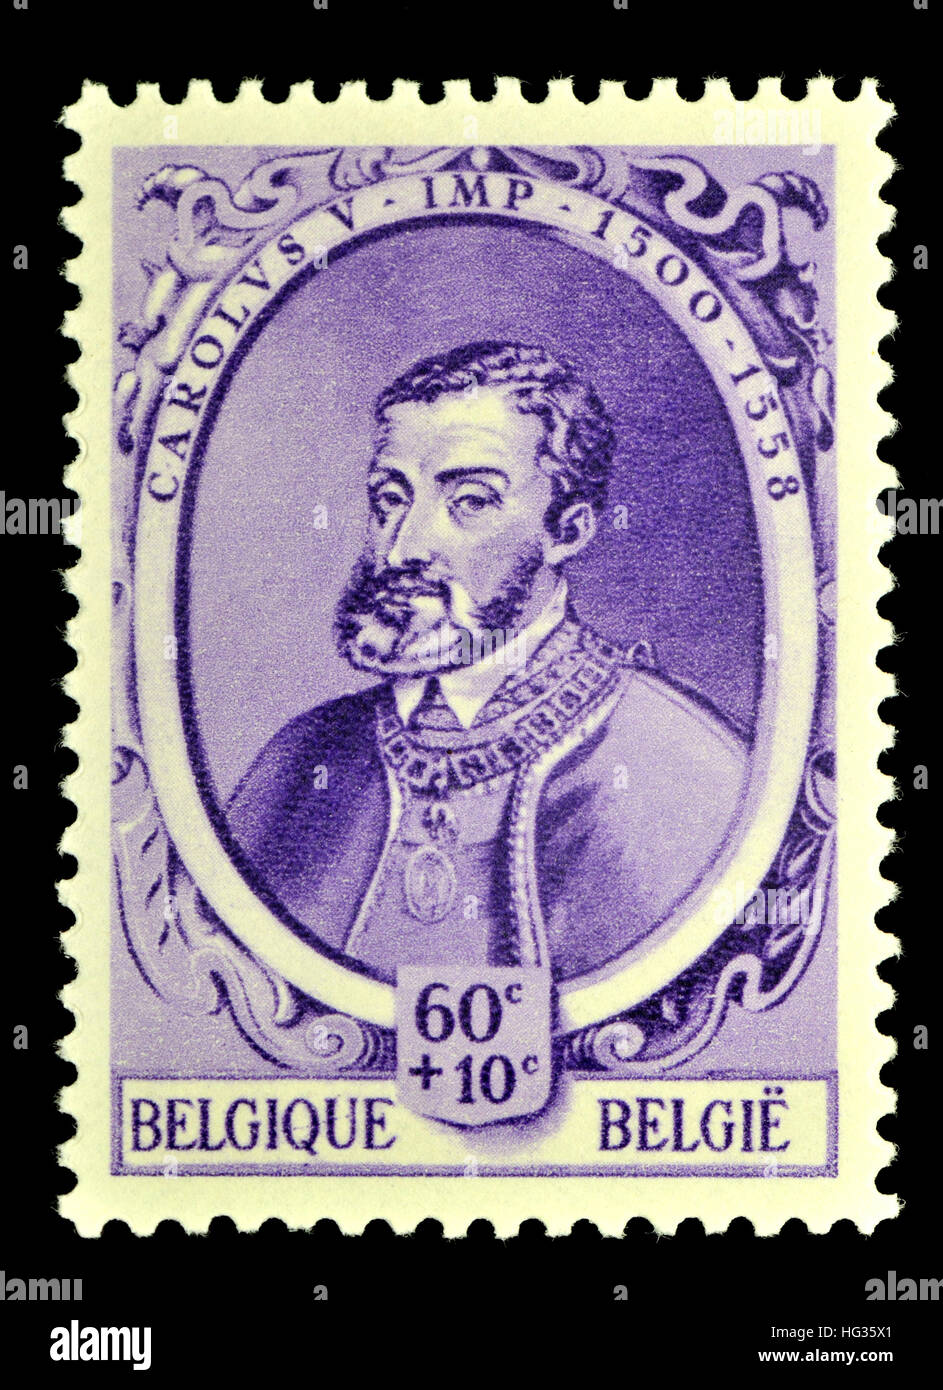 Belgian postage stamp (1941) : Charles V (1500-1558) Holy Roman Emperor (1519-56) Archduke of Austria (1519-21) King of Spain (1519-56) Lord of the... Stock Photo